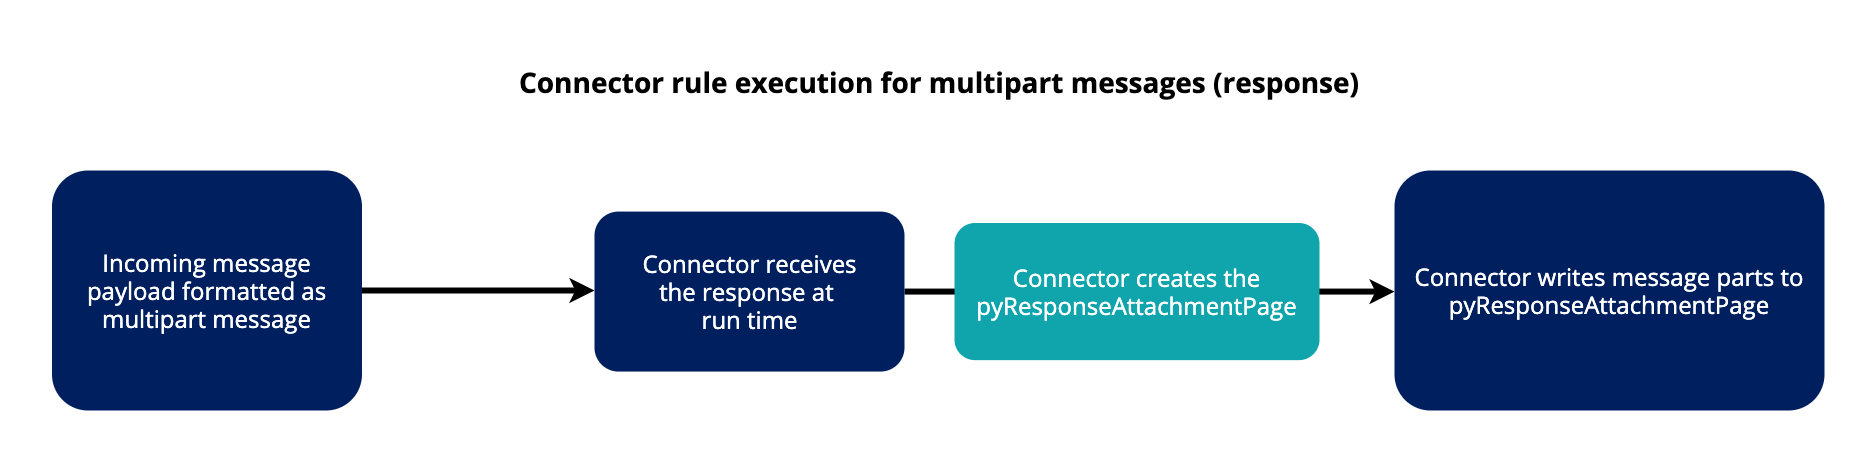 Diagram of connector rule execution for multipart messages response